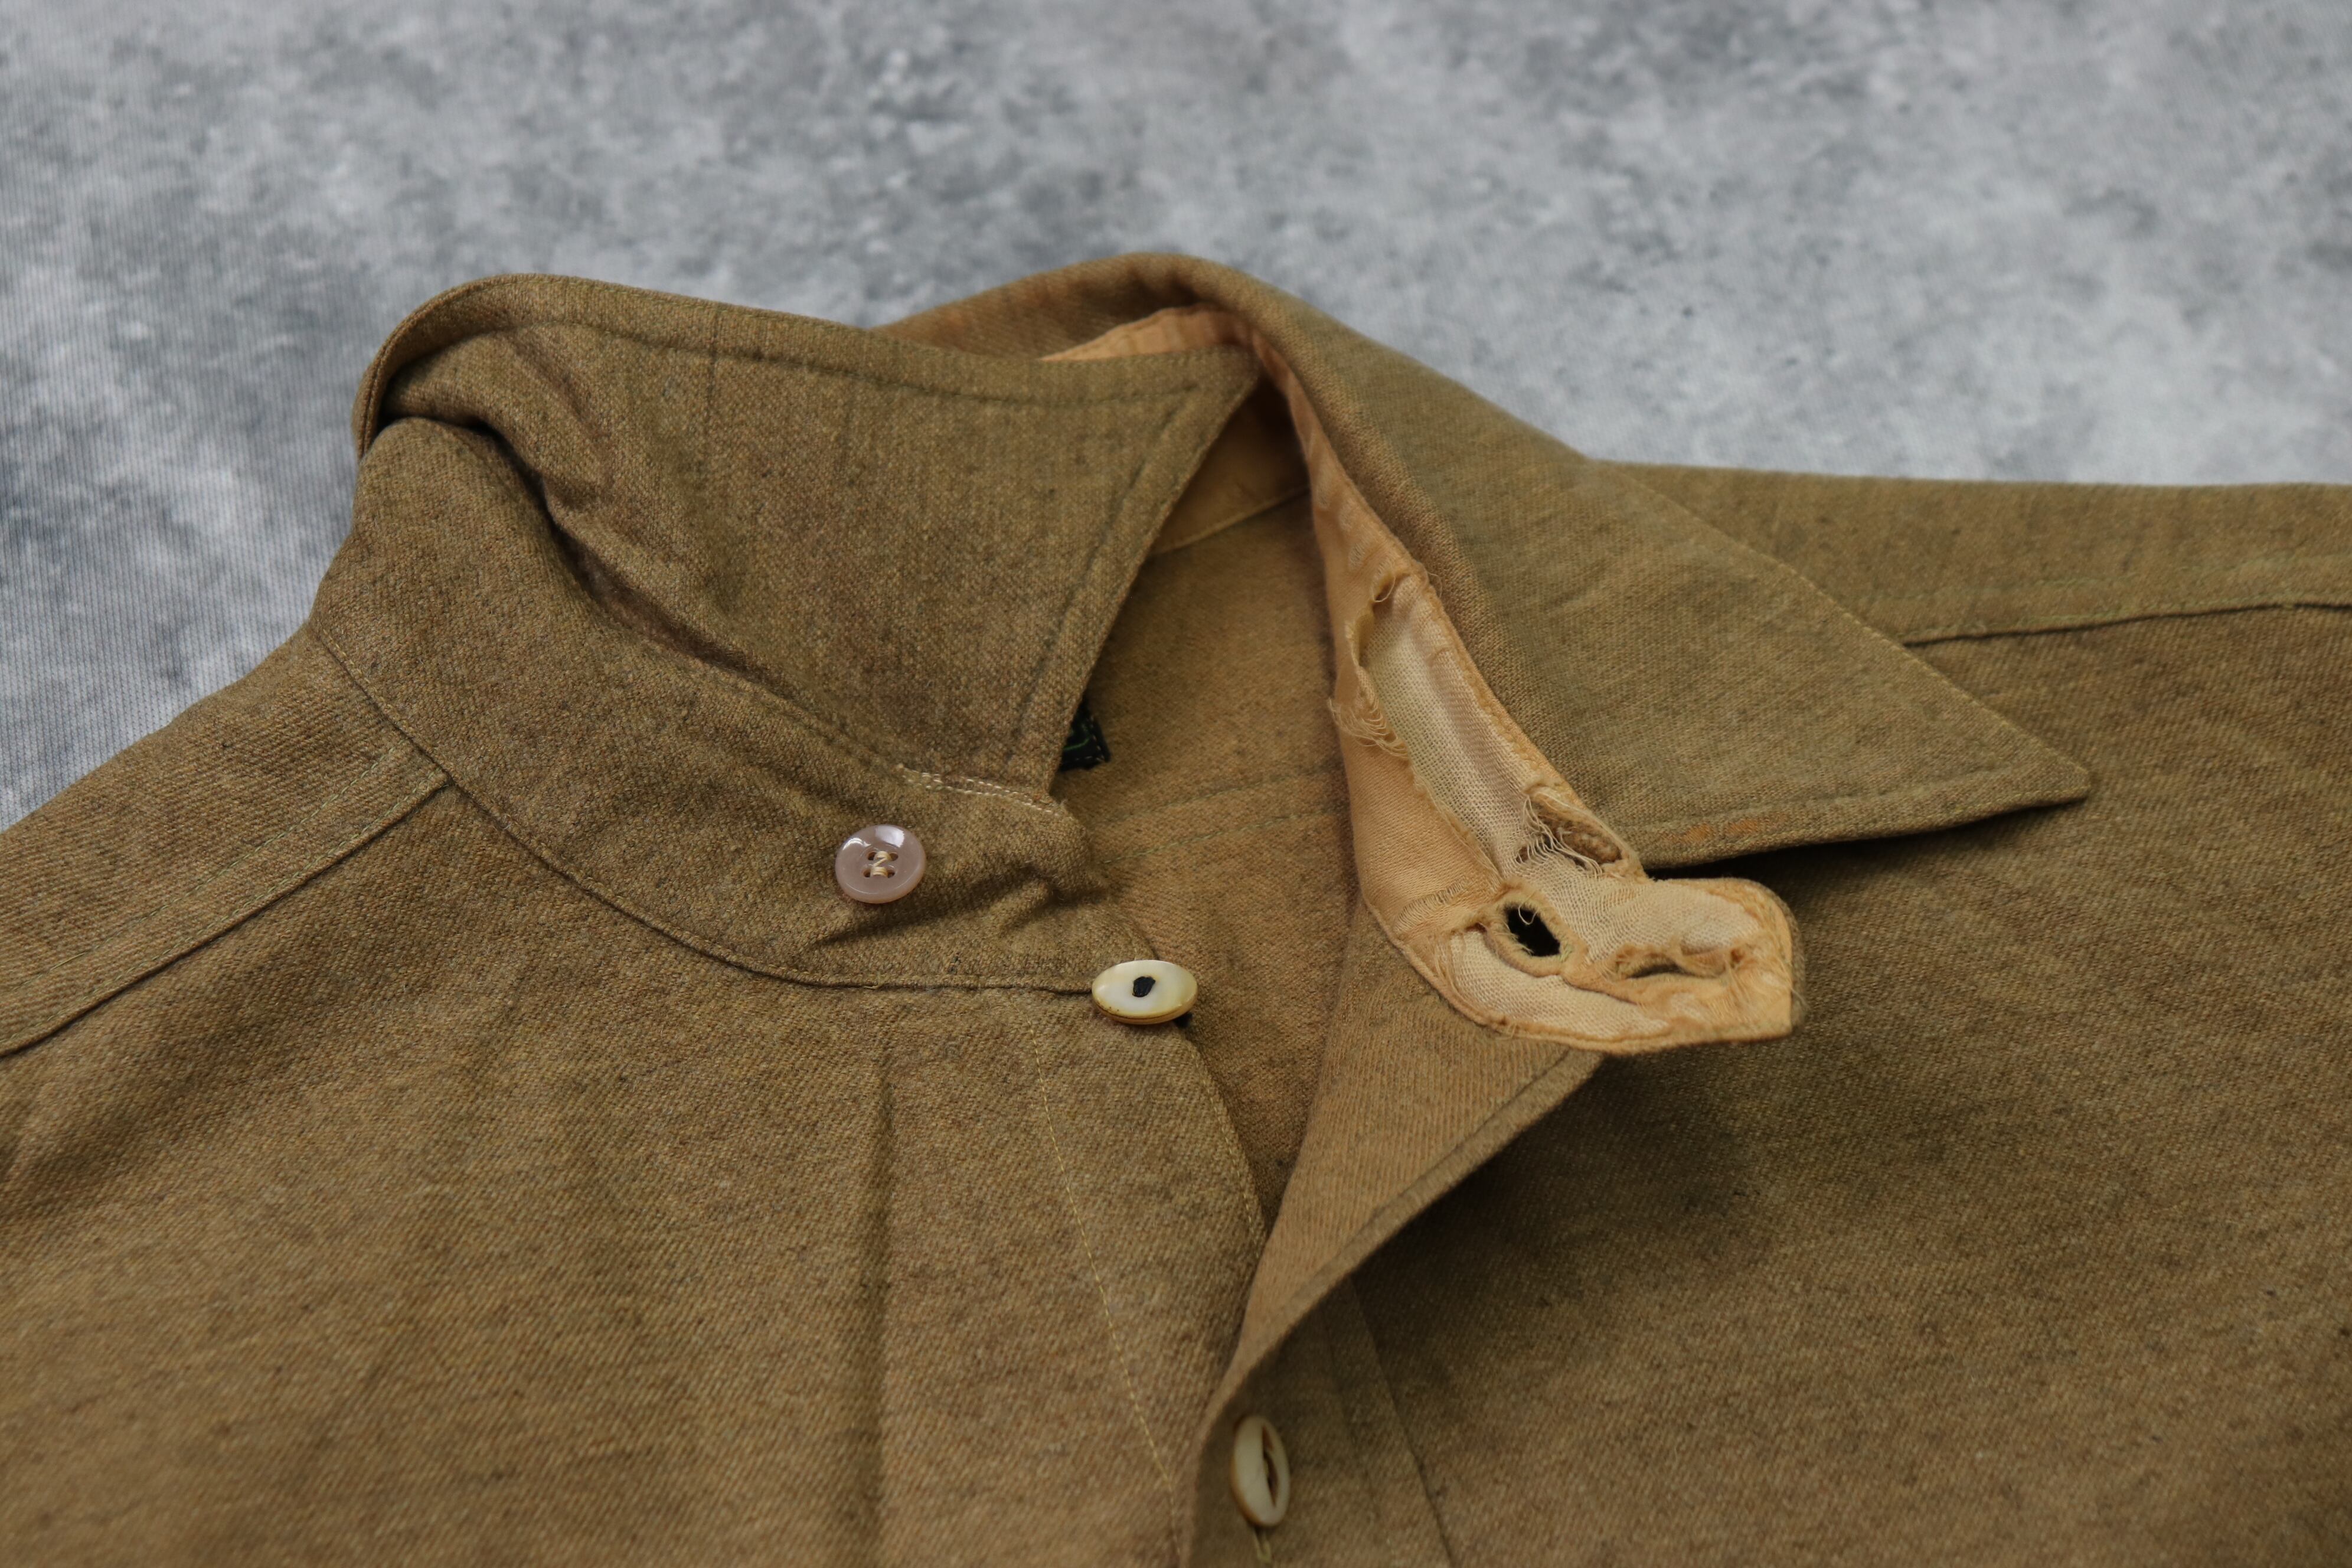 〜30's Town&Country Wool Shirts 〜30年代 ヴィンテージ チンスト ウールシャツ ダウンアンドカントリー  タウン&カントリー 古着　A568 | ROGER'S used clothing - ロジャース - powered by BASE